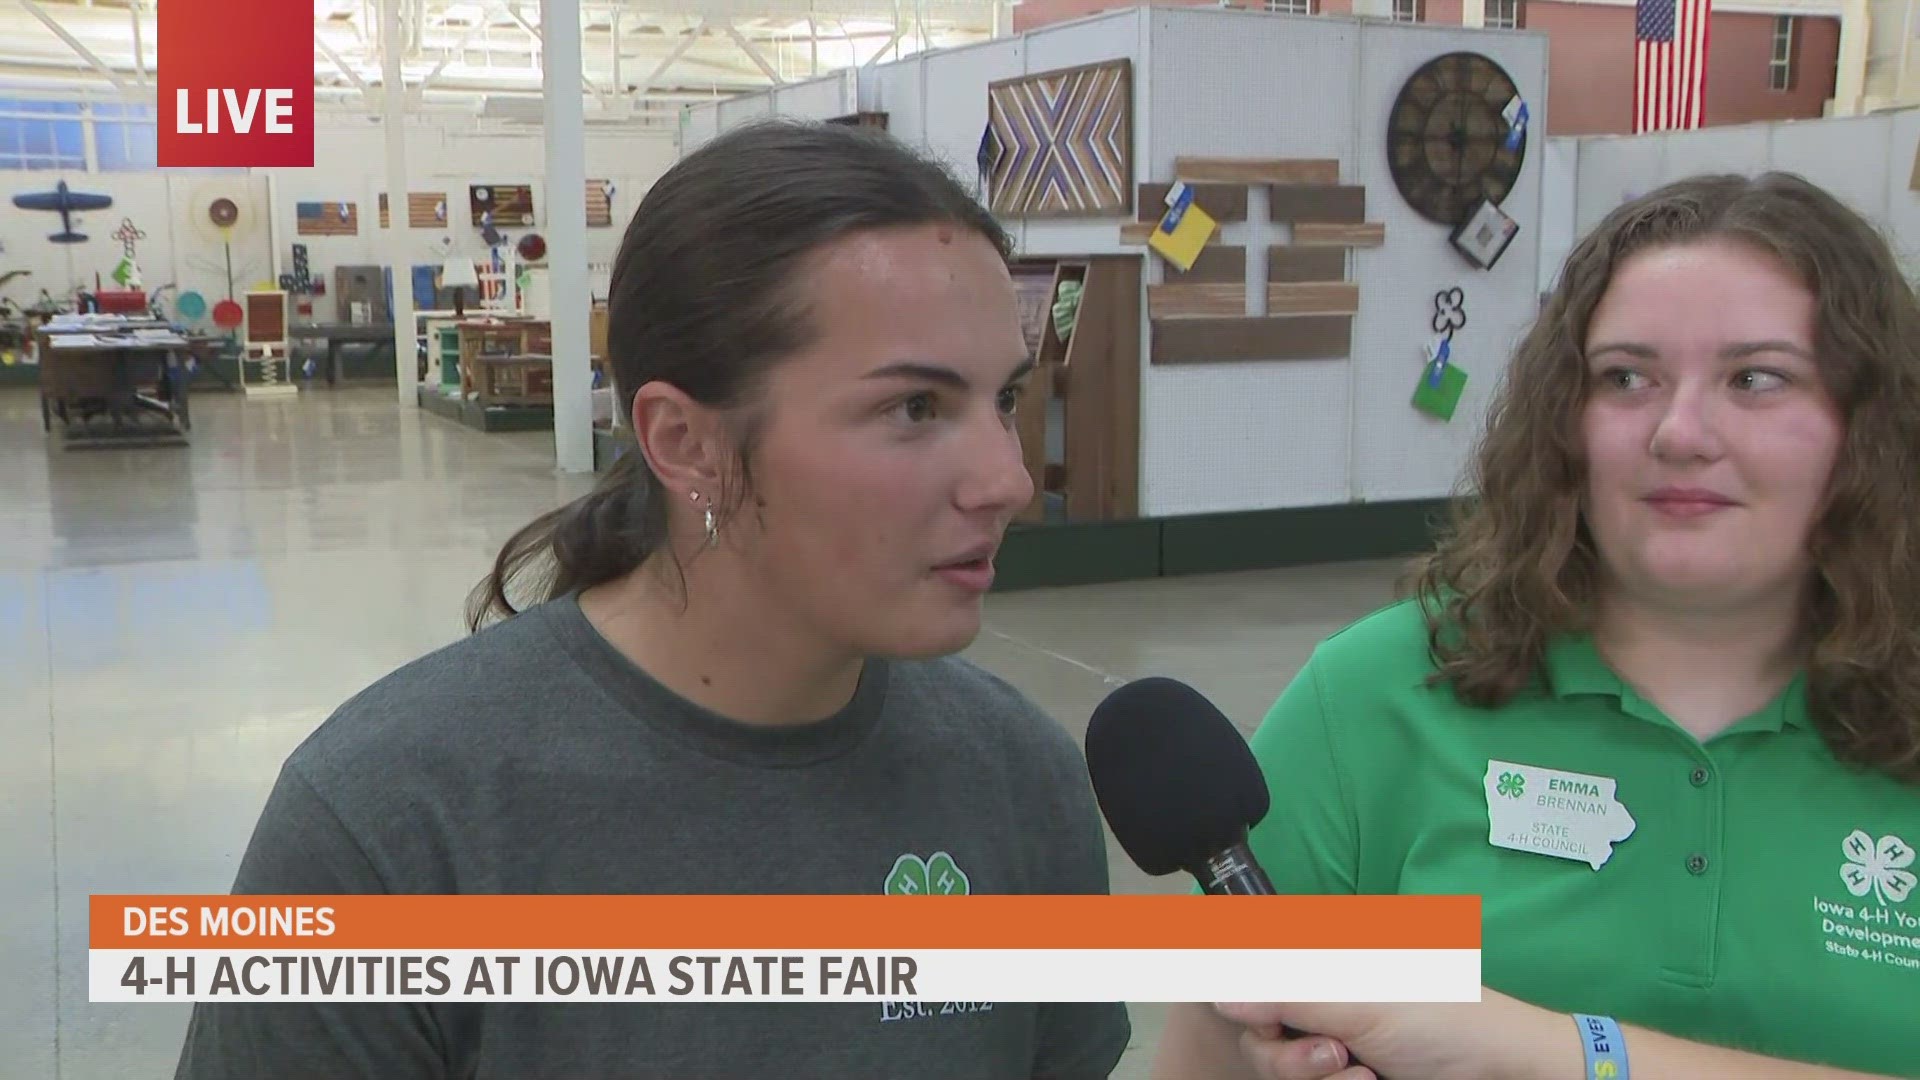 Two 4-H members describe their experiences and their love of the Iowa State Fair.